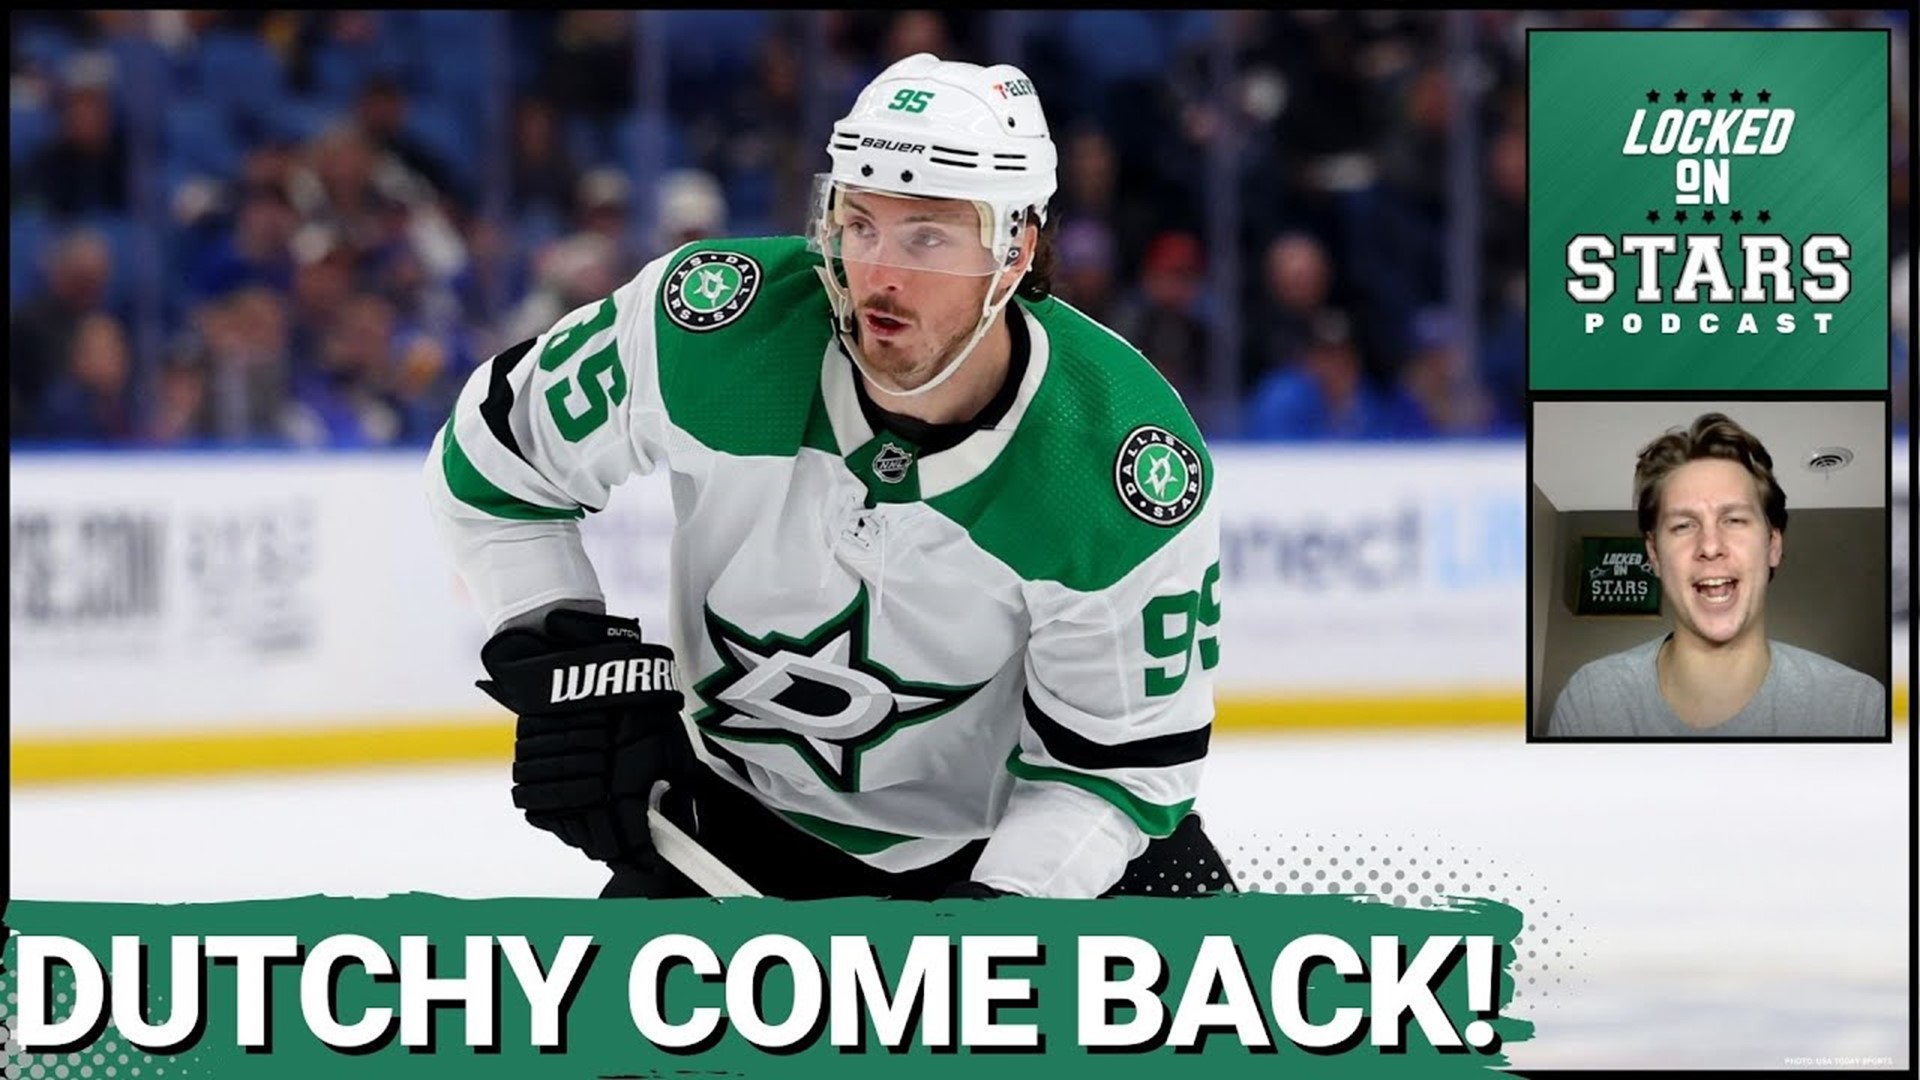 Matt Duchene was a late scratch to yesterday's game for the Dallas Stars after participating in warm ups. Will he be ready tonight in another crucial game?